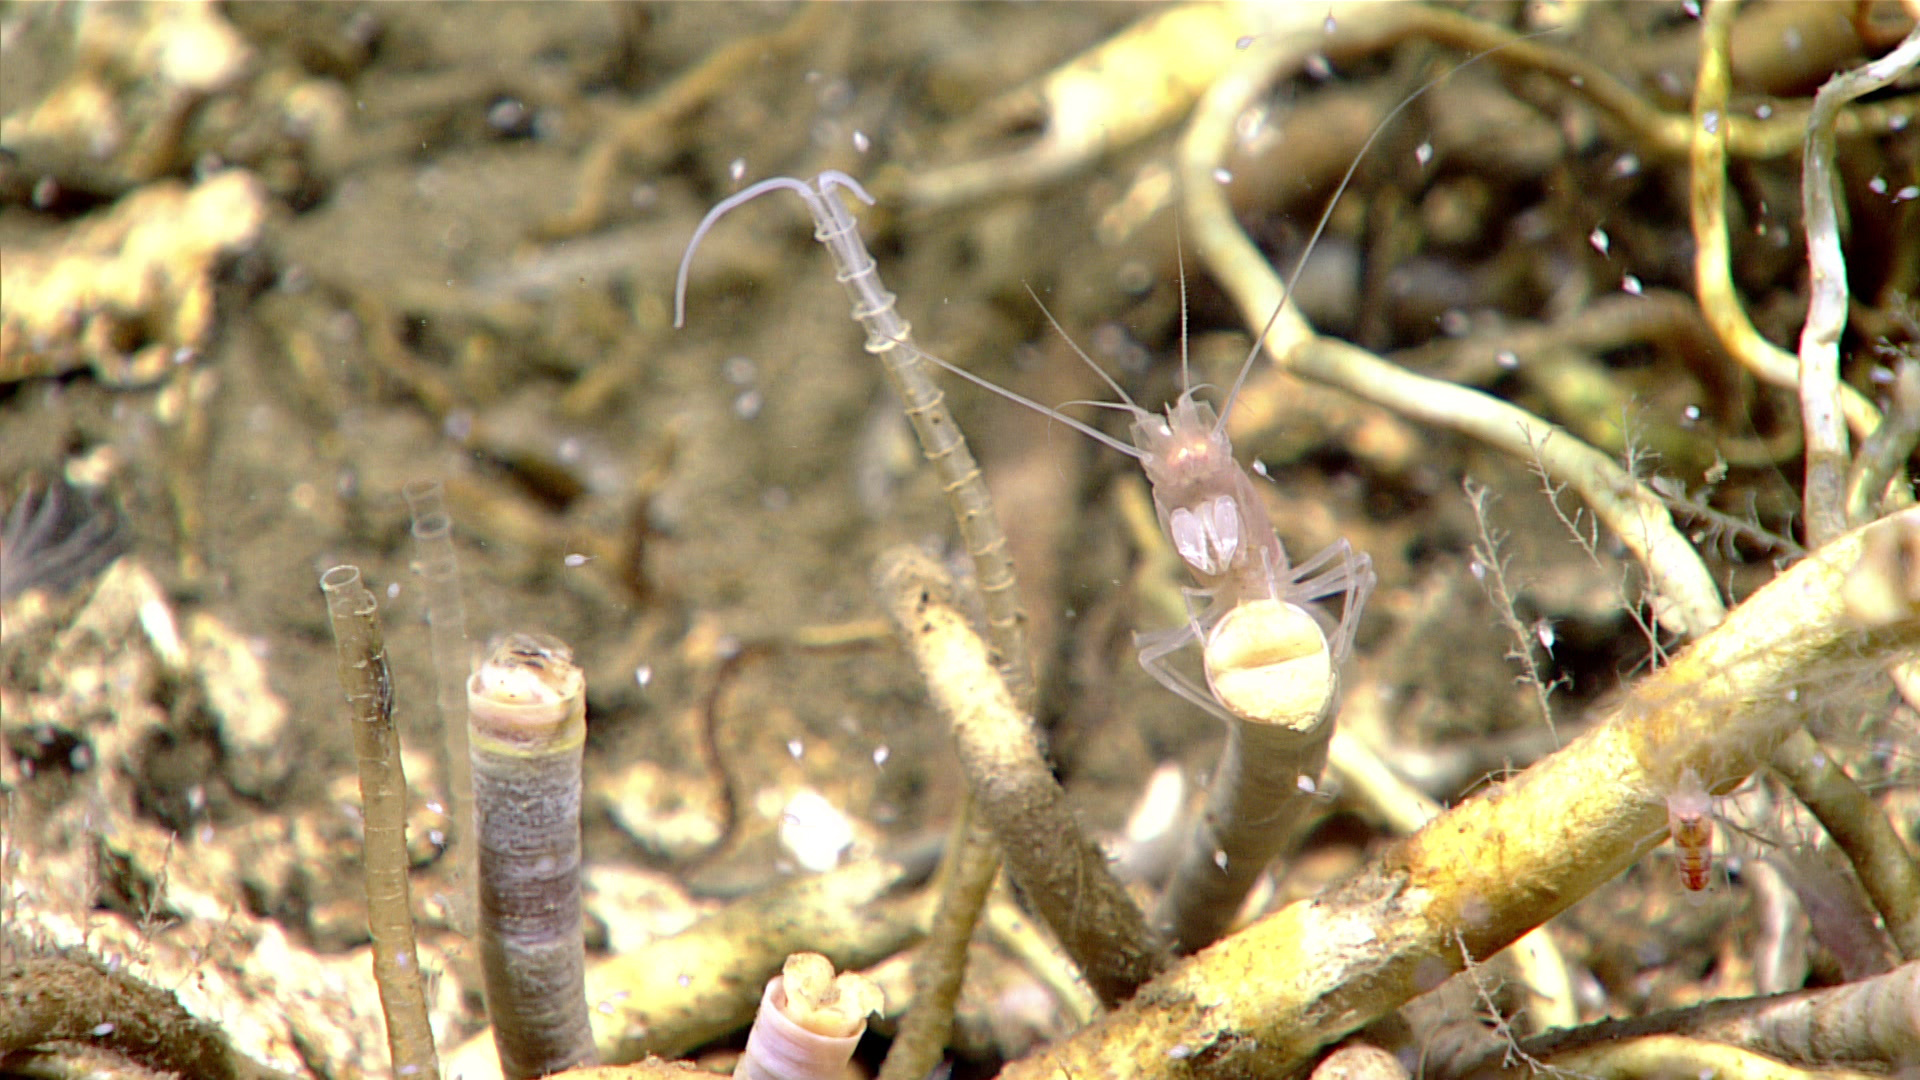 A dense cluster of Escarpia sp. chemosynthetic tubeworms at a cold seep, accompanied by an Alvinocaris sp. shrimp and a chaetopterid polychaete waving its pair of feeding palps from its slender bamboo-like tube.